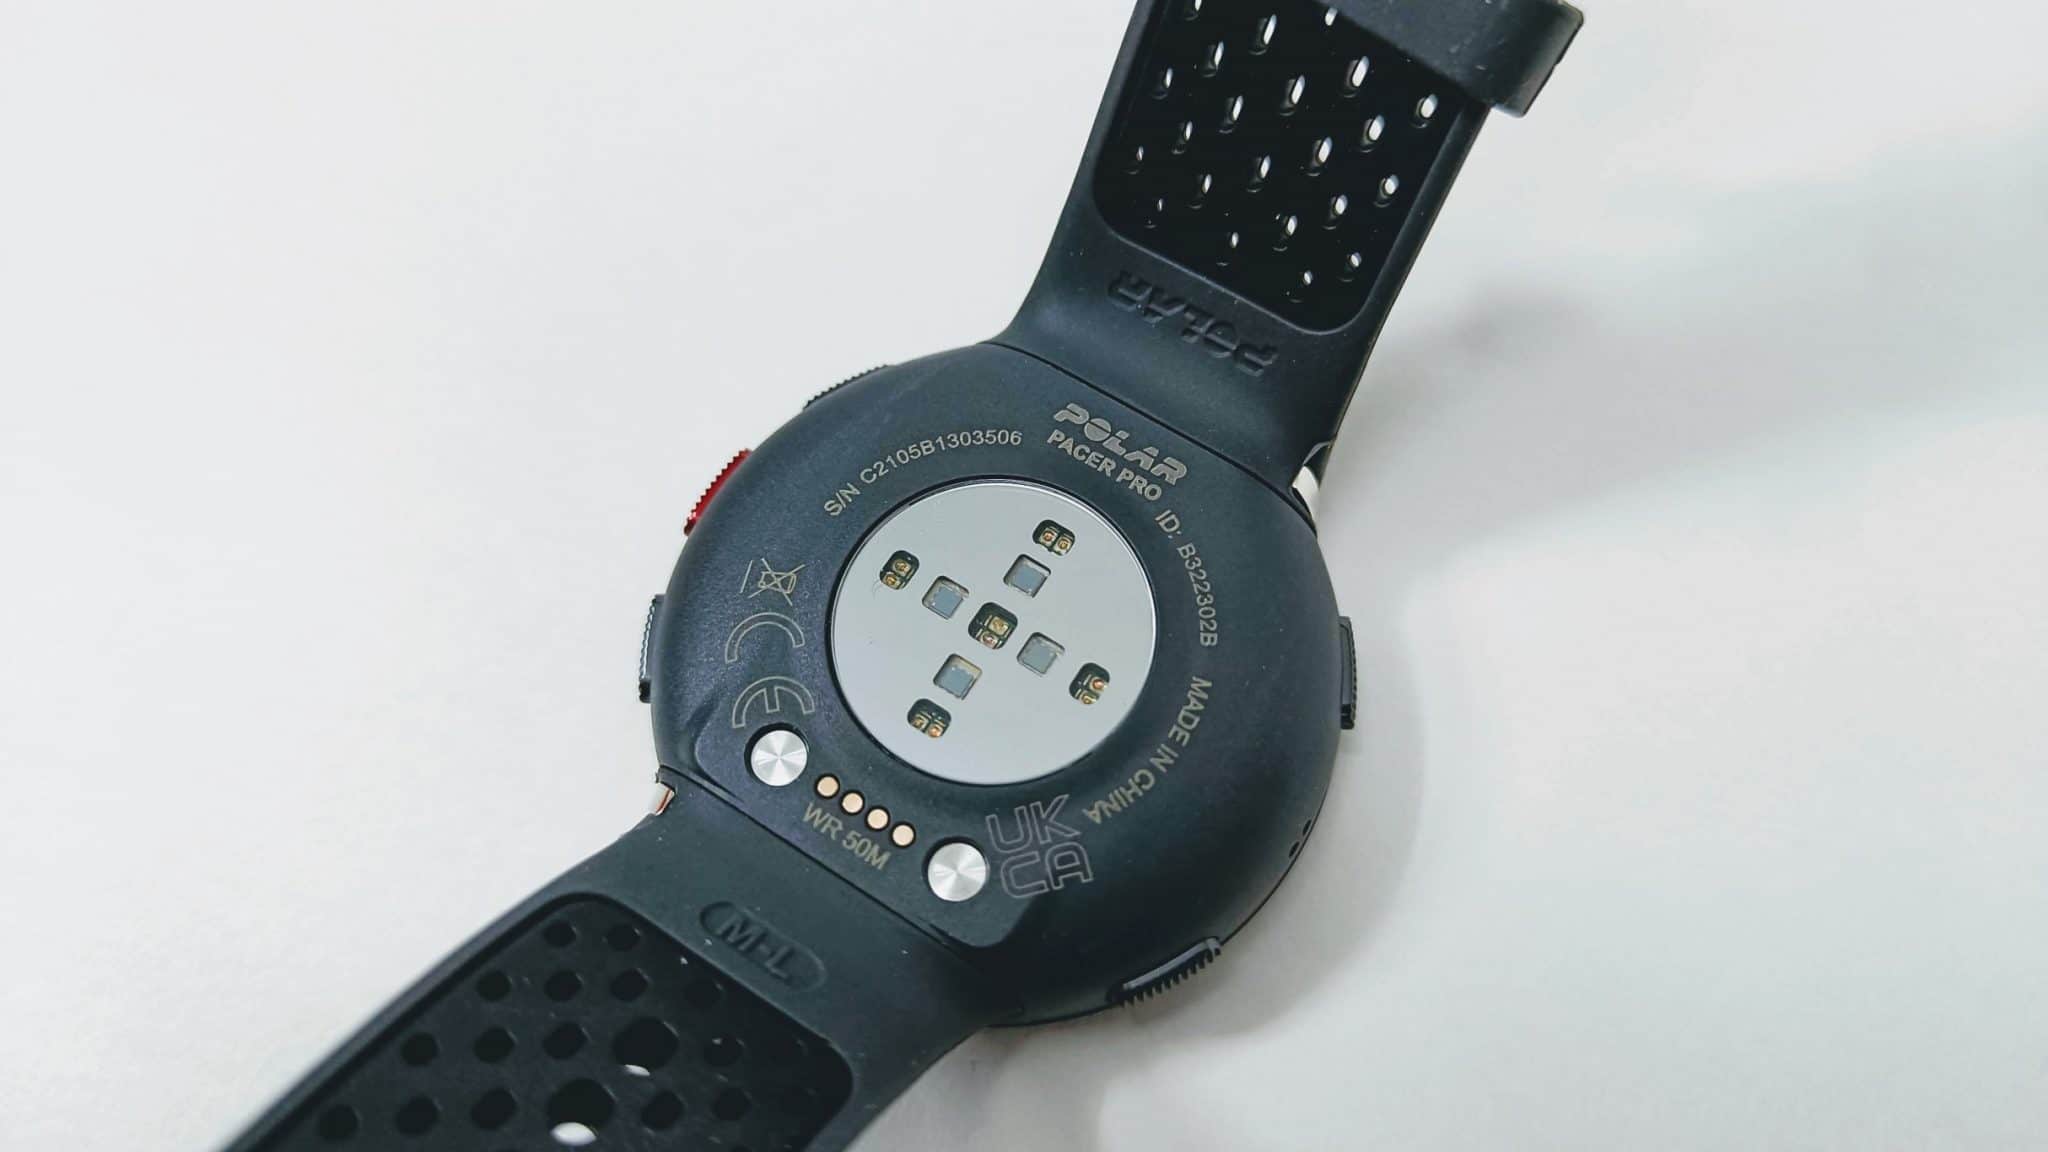 Polar Pacer Pro – the world's launch of a new running watch